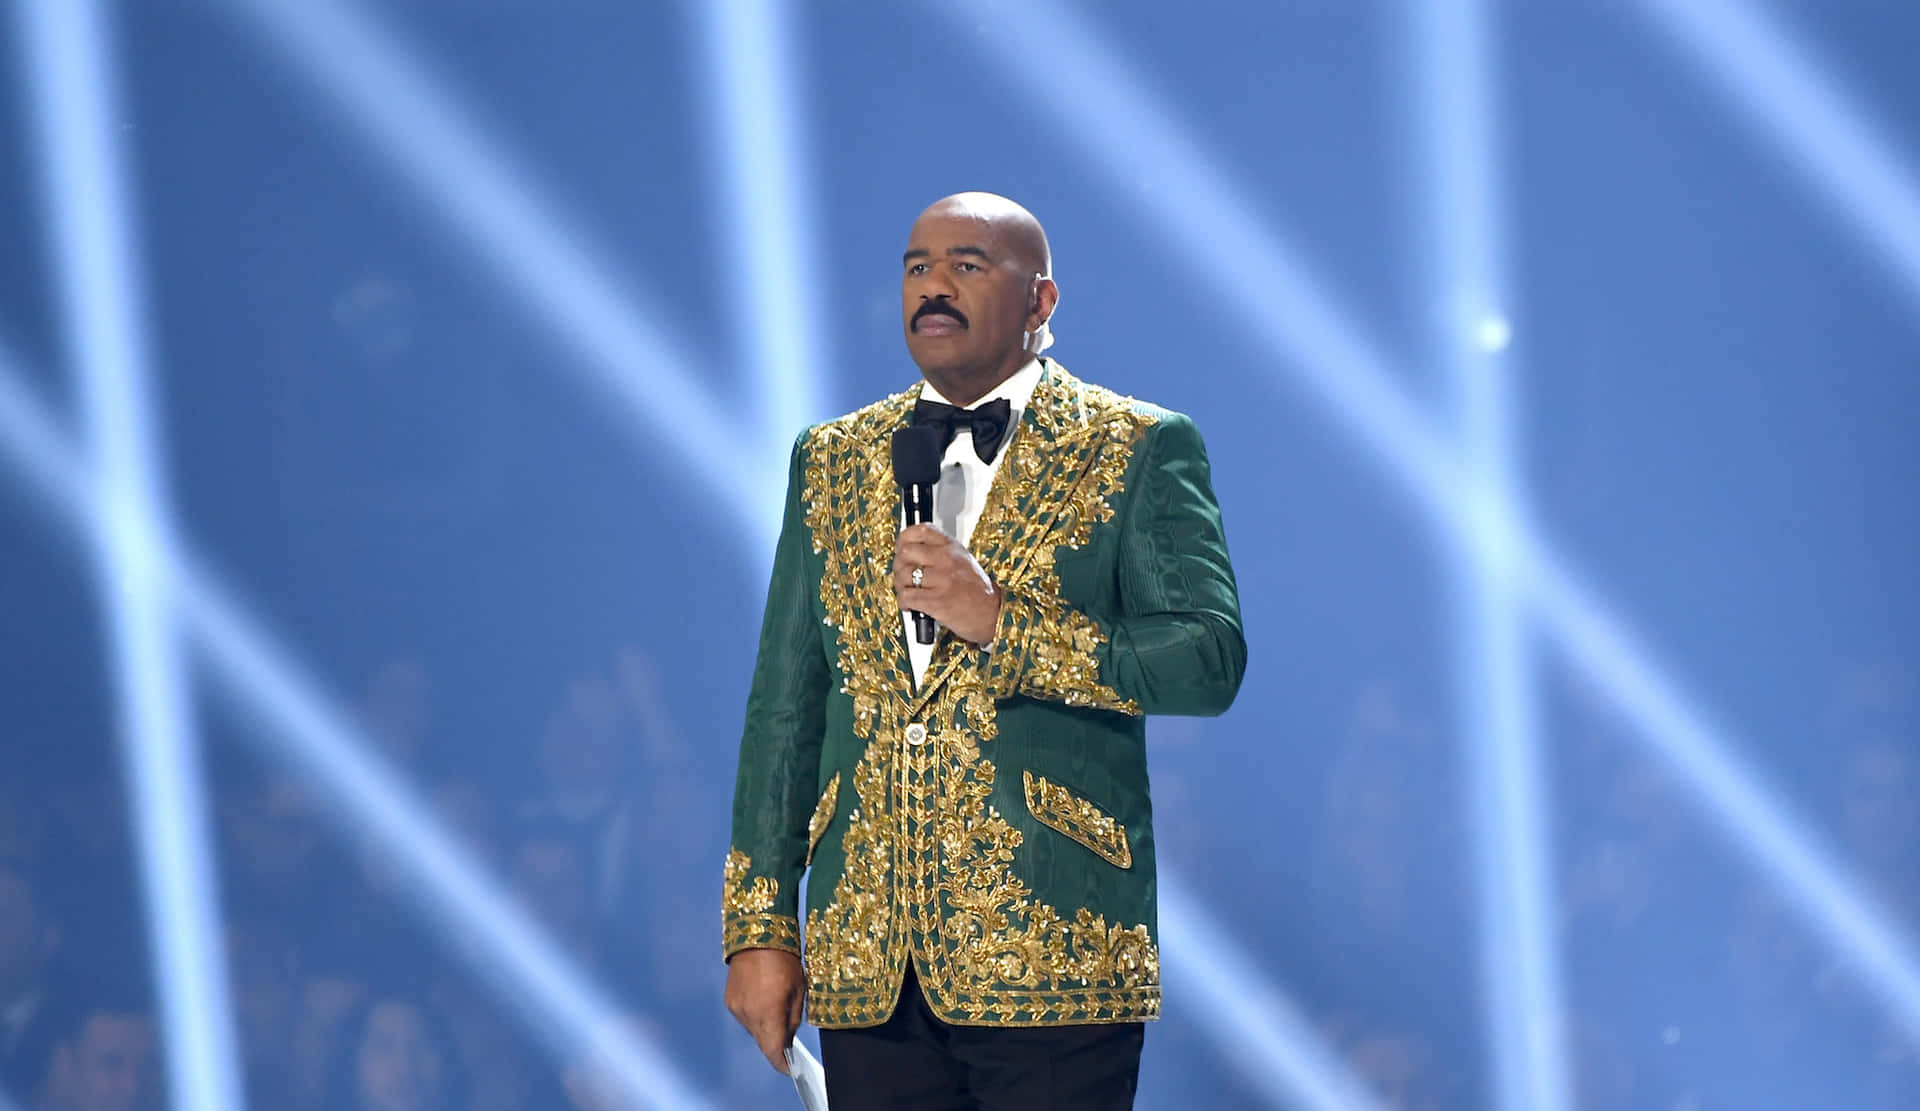 Comedian Steve Harvey During His Charismatic Performance On Stage. Background